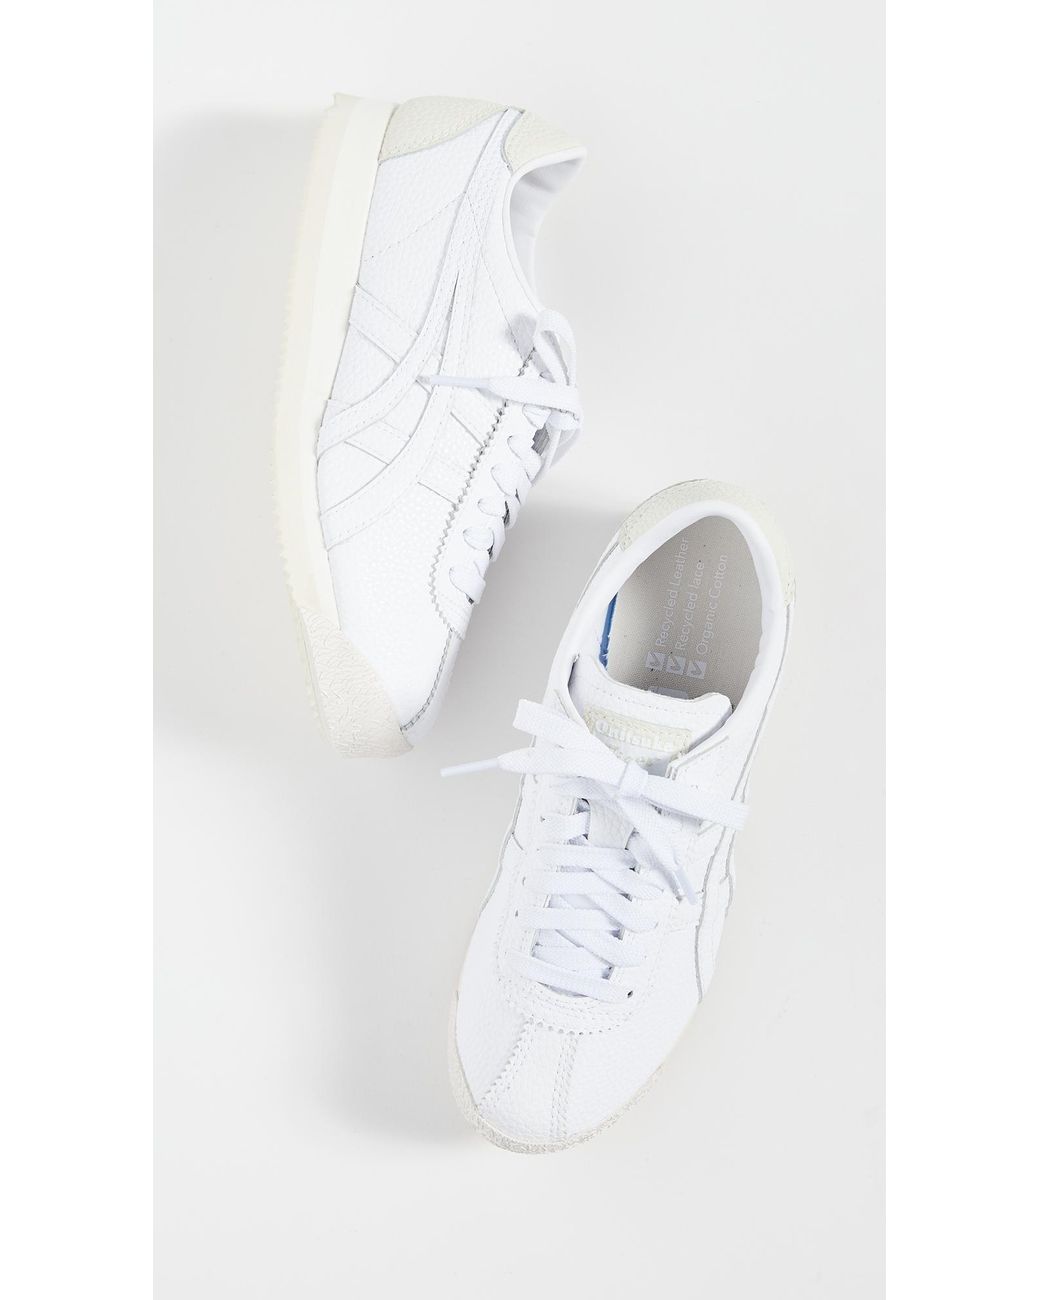 Onitsuka Tiger Tiger Corsair Sneakers in White | Lyst